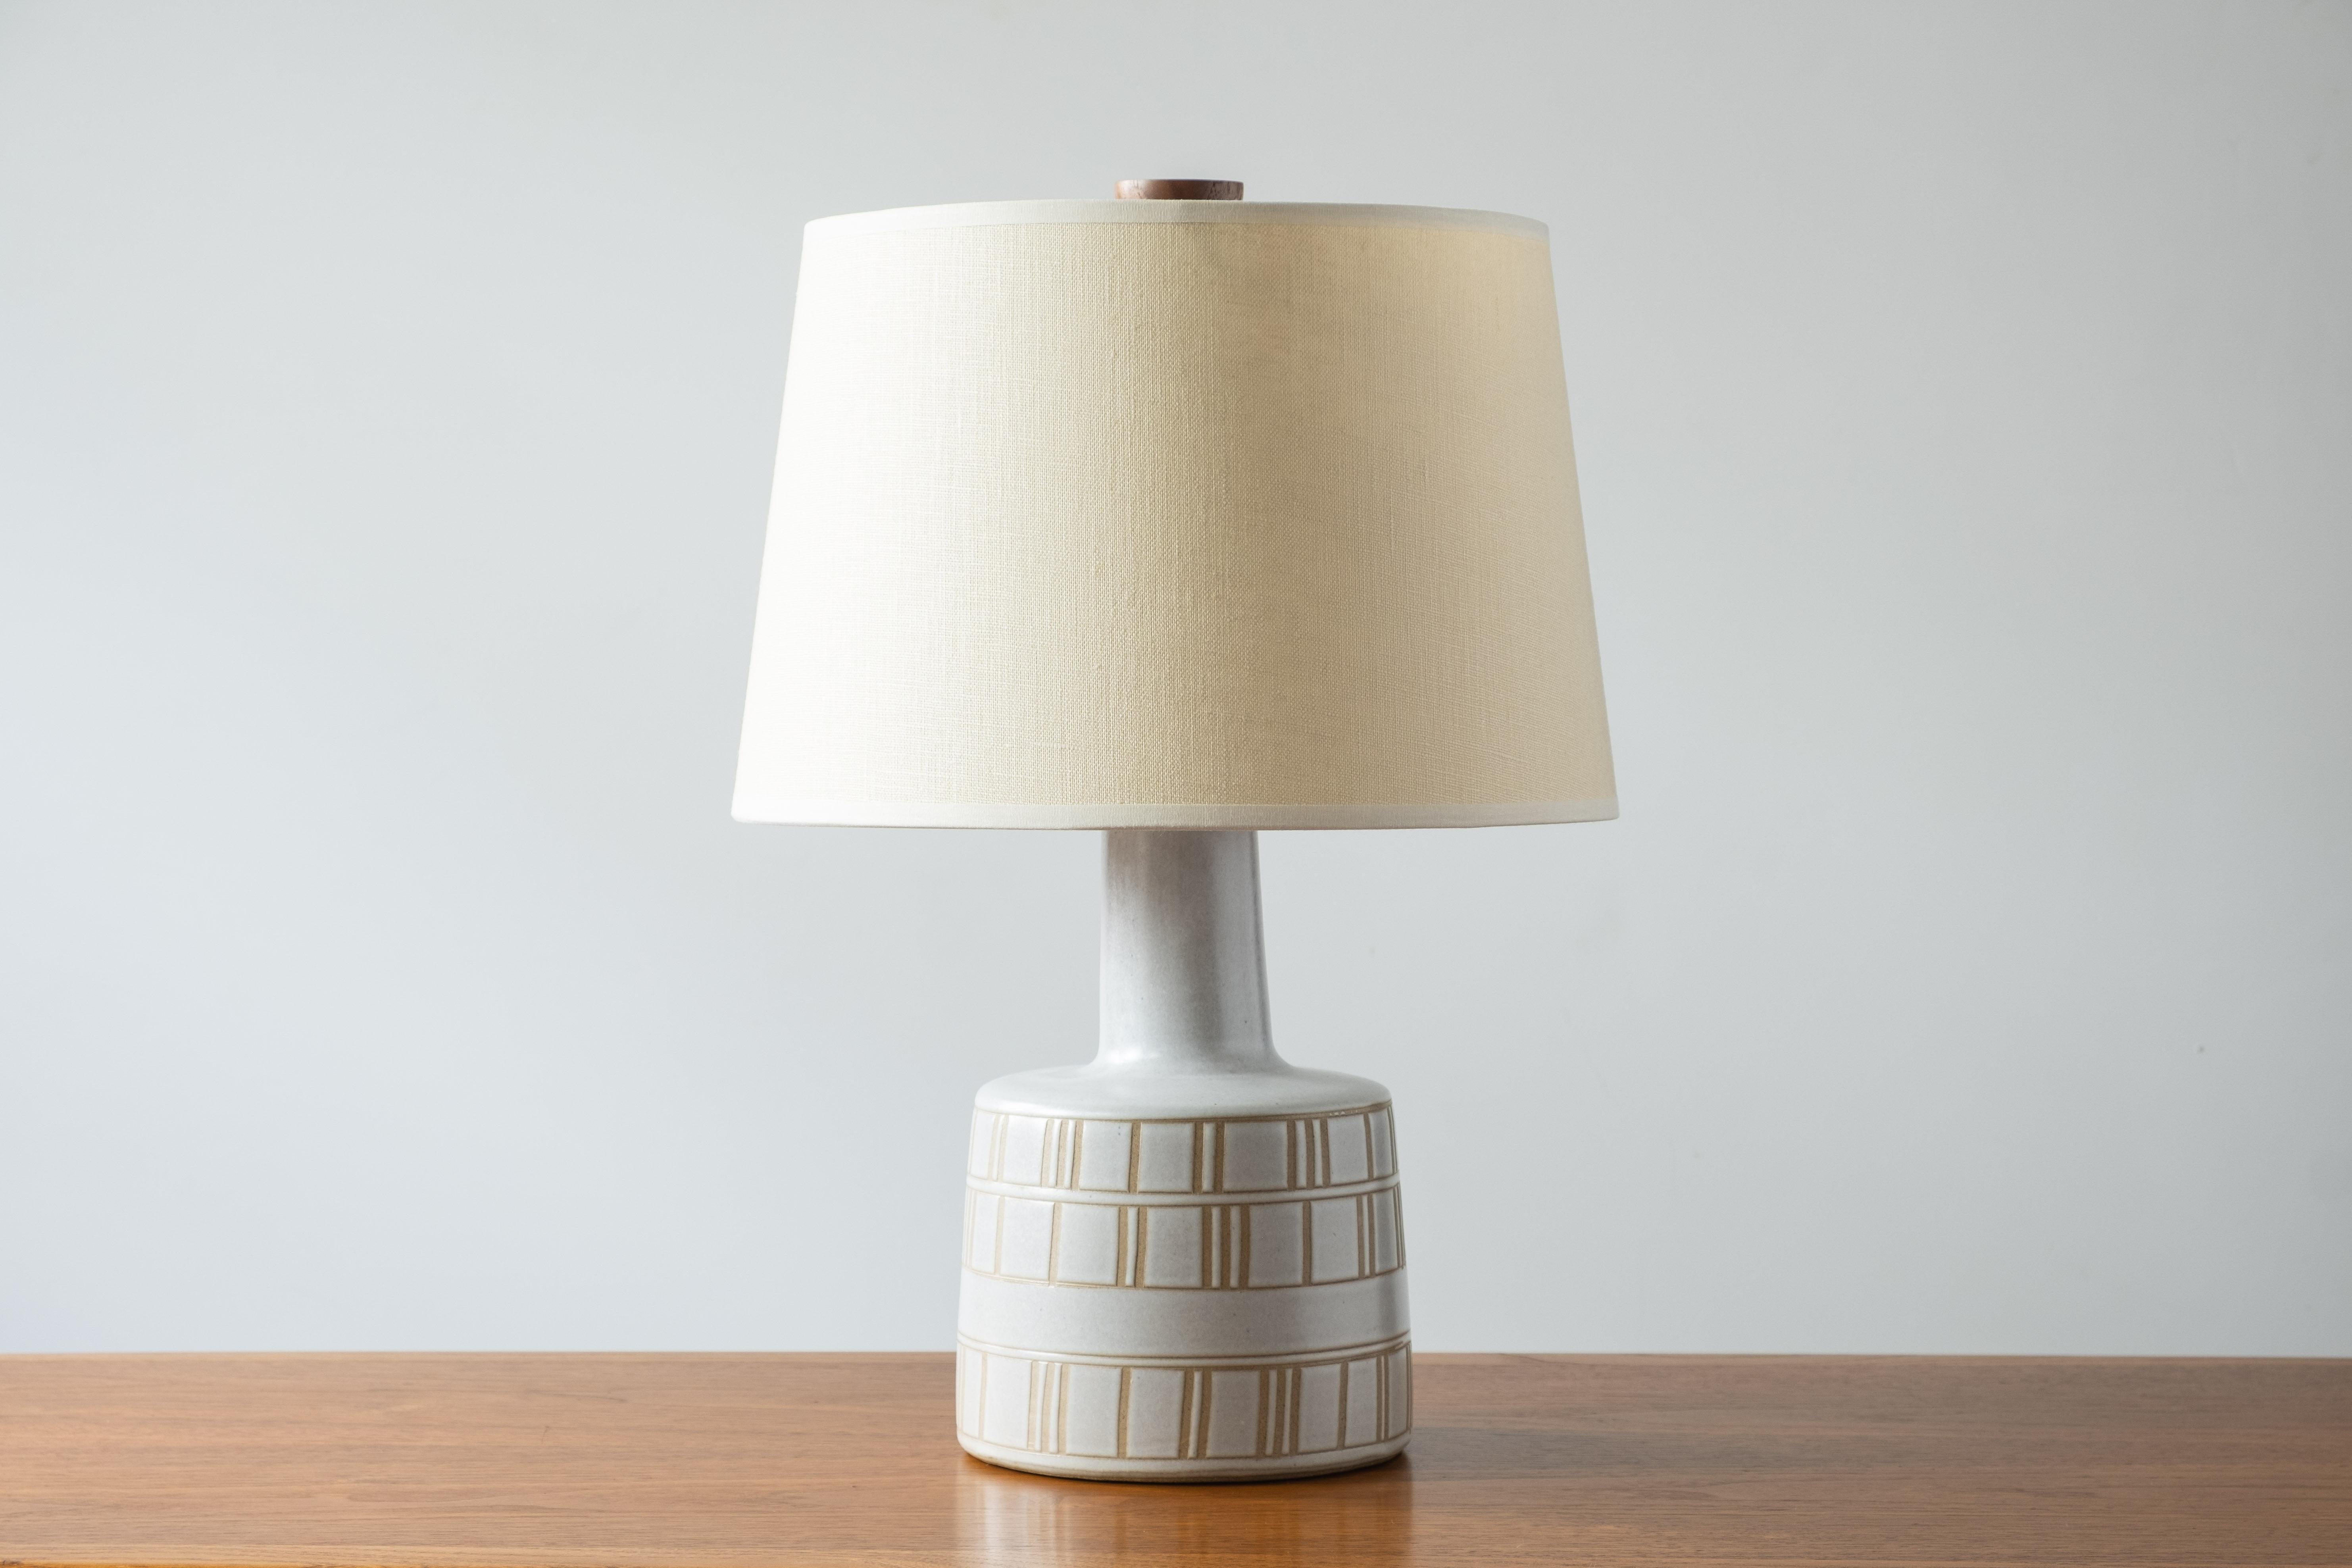 What is it?
—
Another gem from the masters of mid century lightning – Gordon and Jane Martz.

This signed Martz model 105 lamp comes in a matte white glaze with incised lines in a horizontal rectangle pattern. The glaze is not a pure bright white,